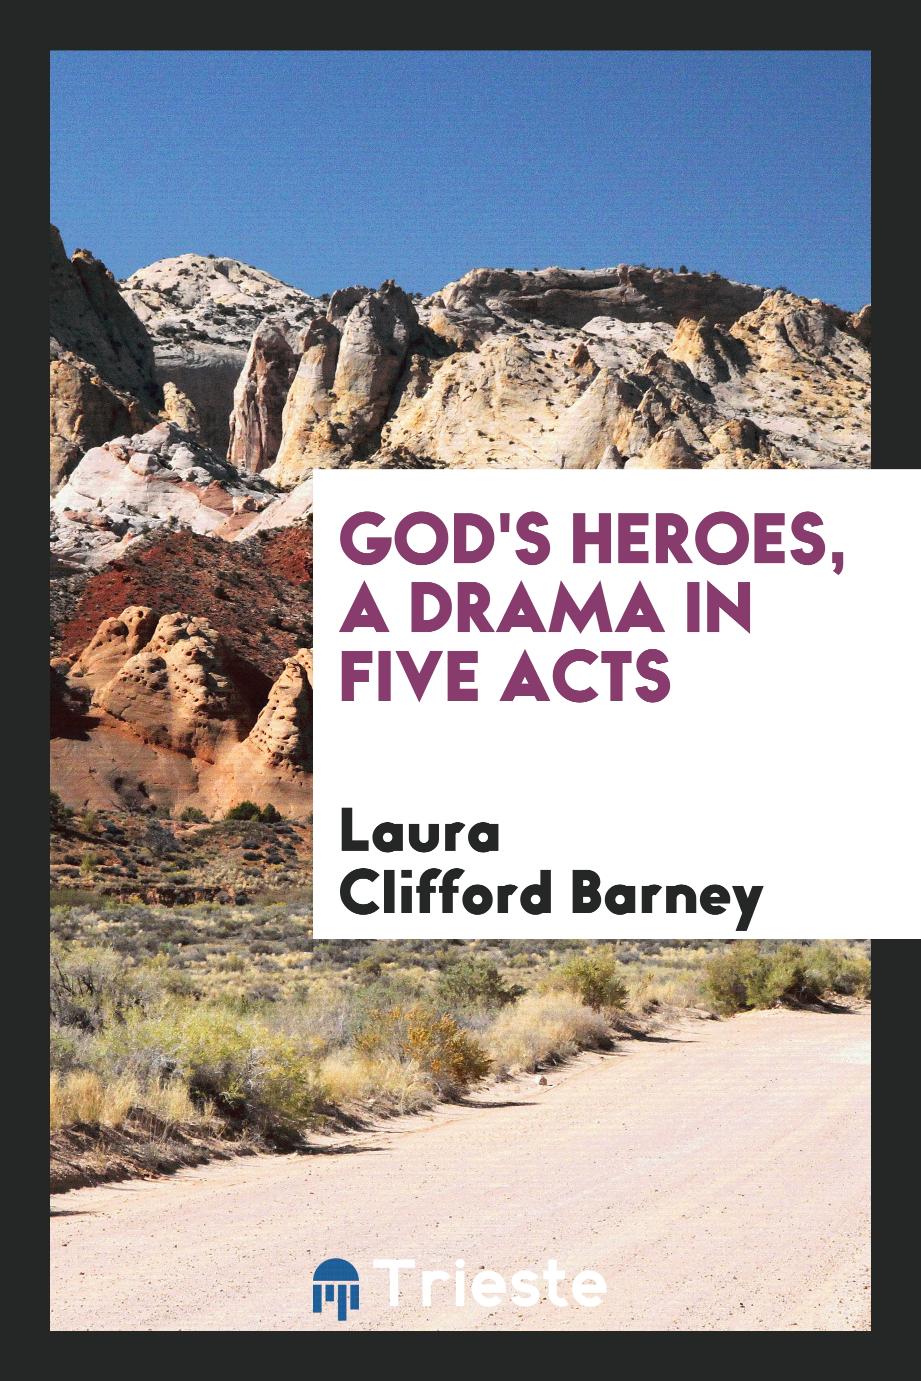 God's Heroes, a Drama in Five Acts